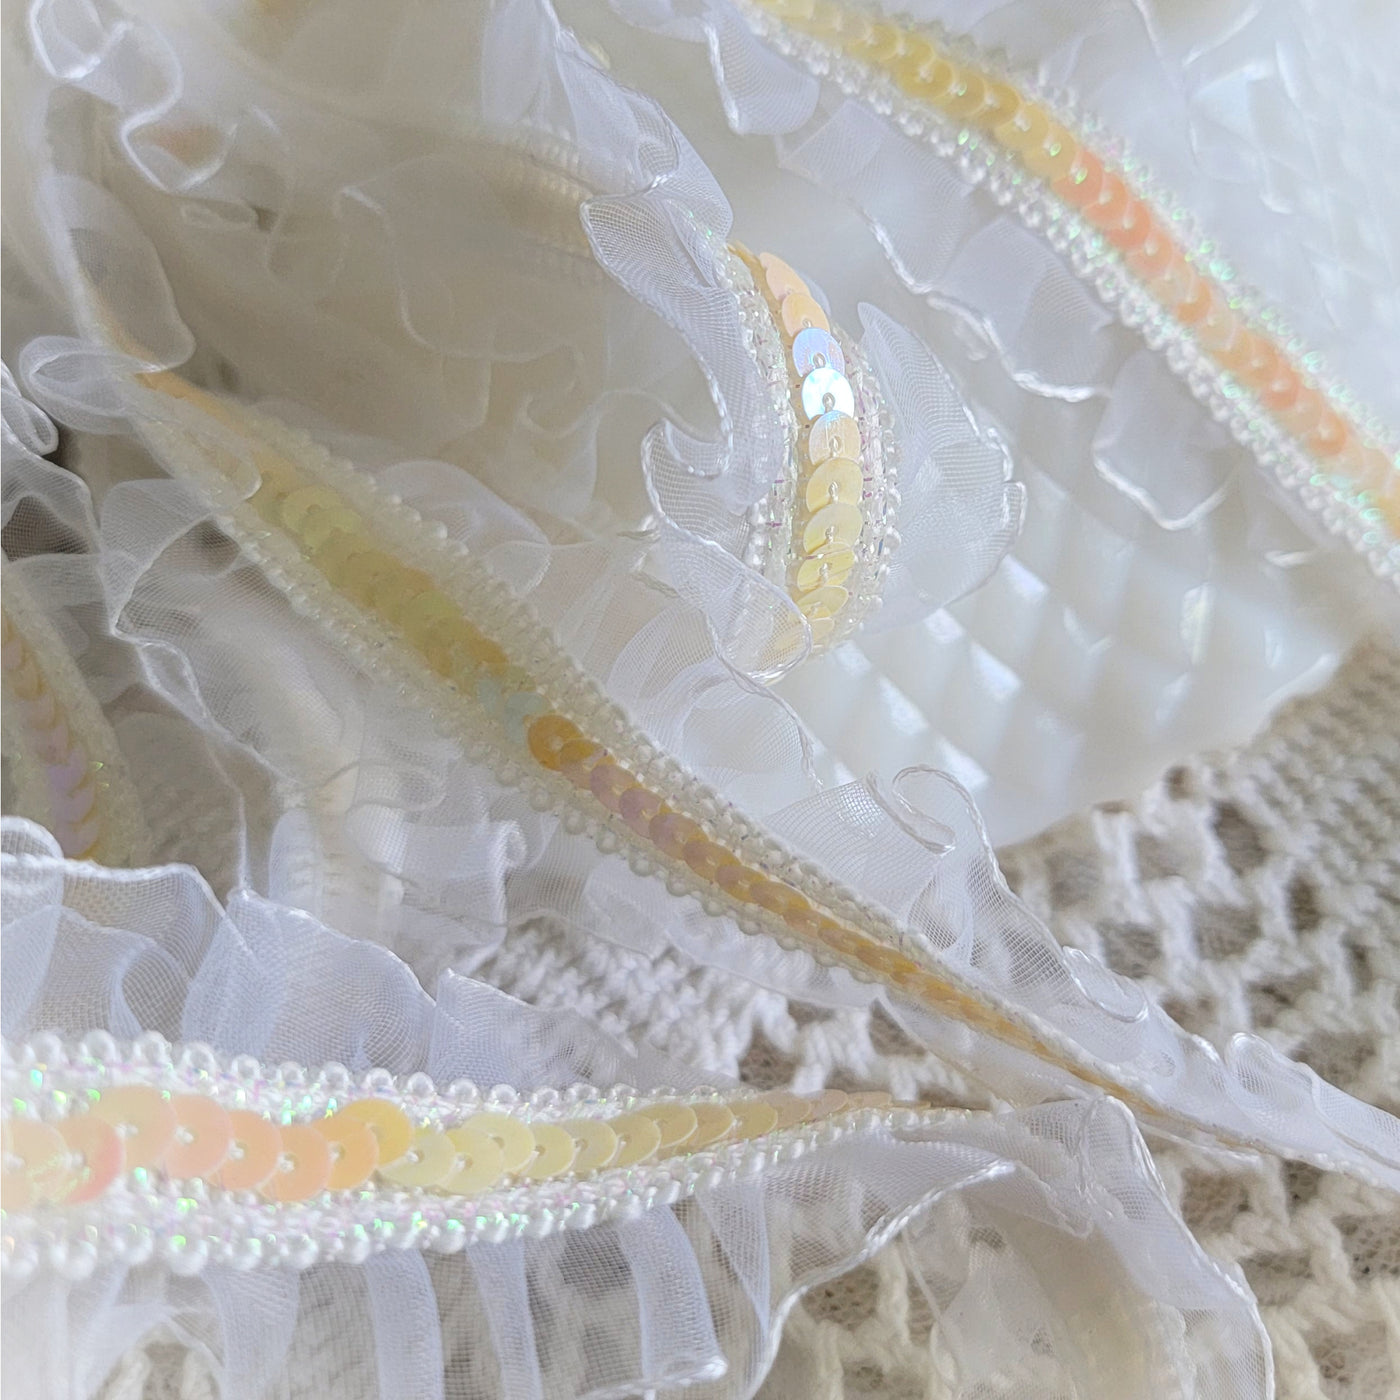 10 Yards of White Lace Trim/ 10 Yards of White Lace Ribbon, Approx